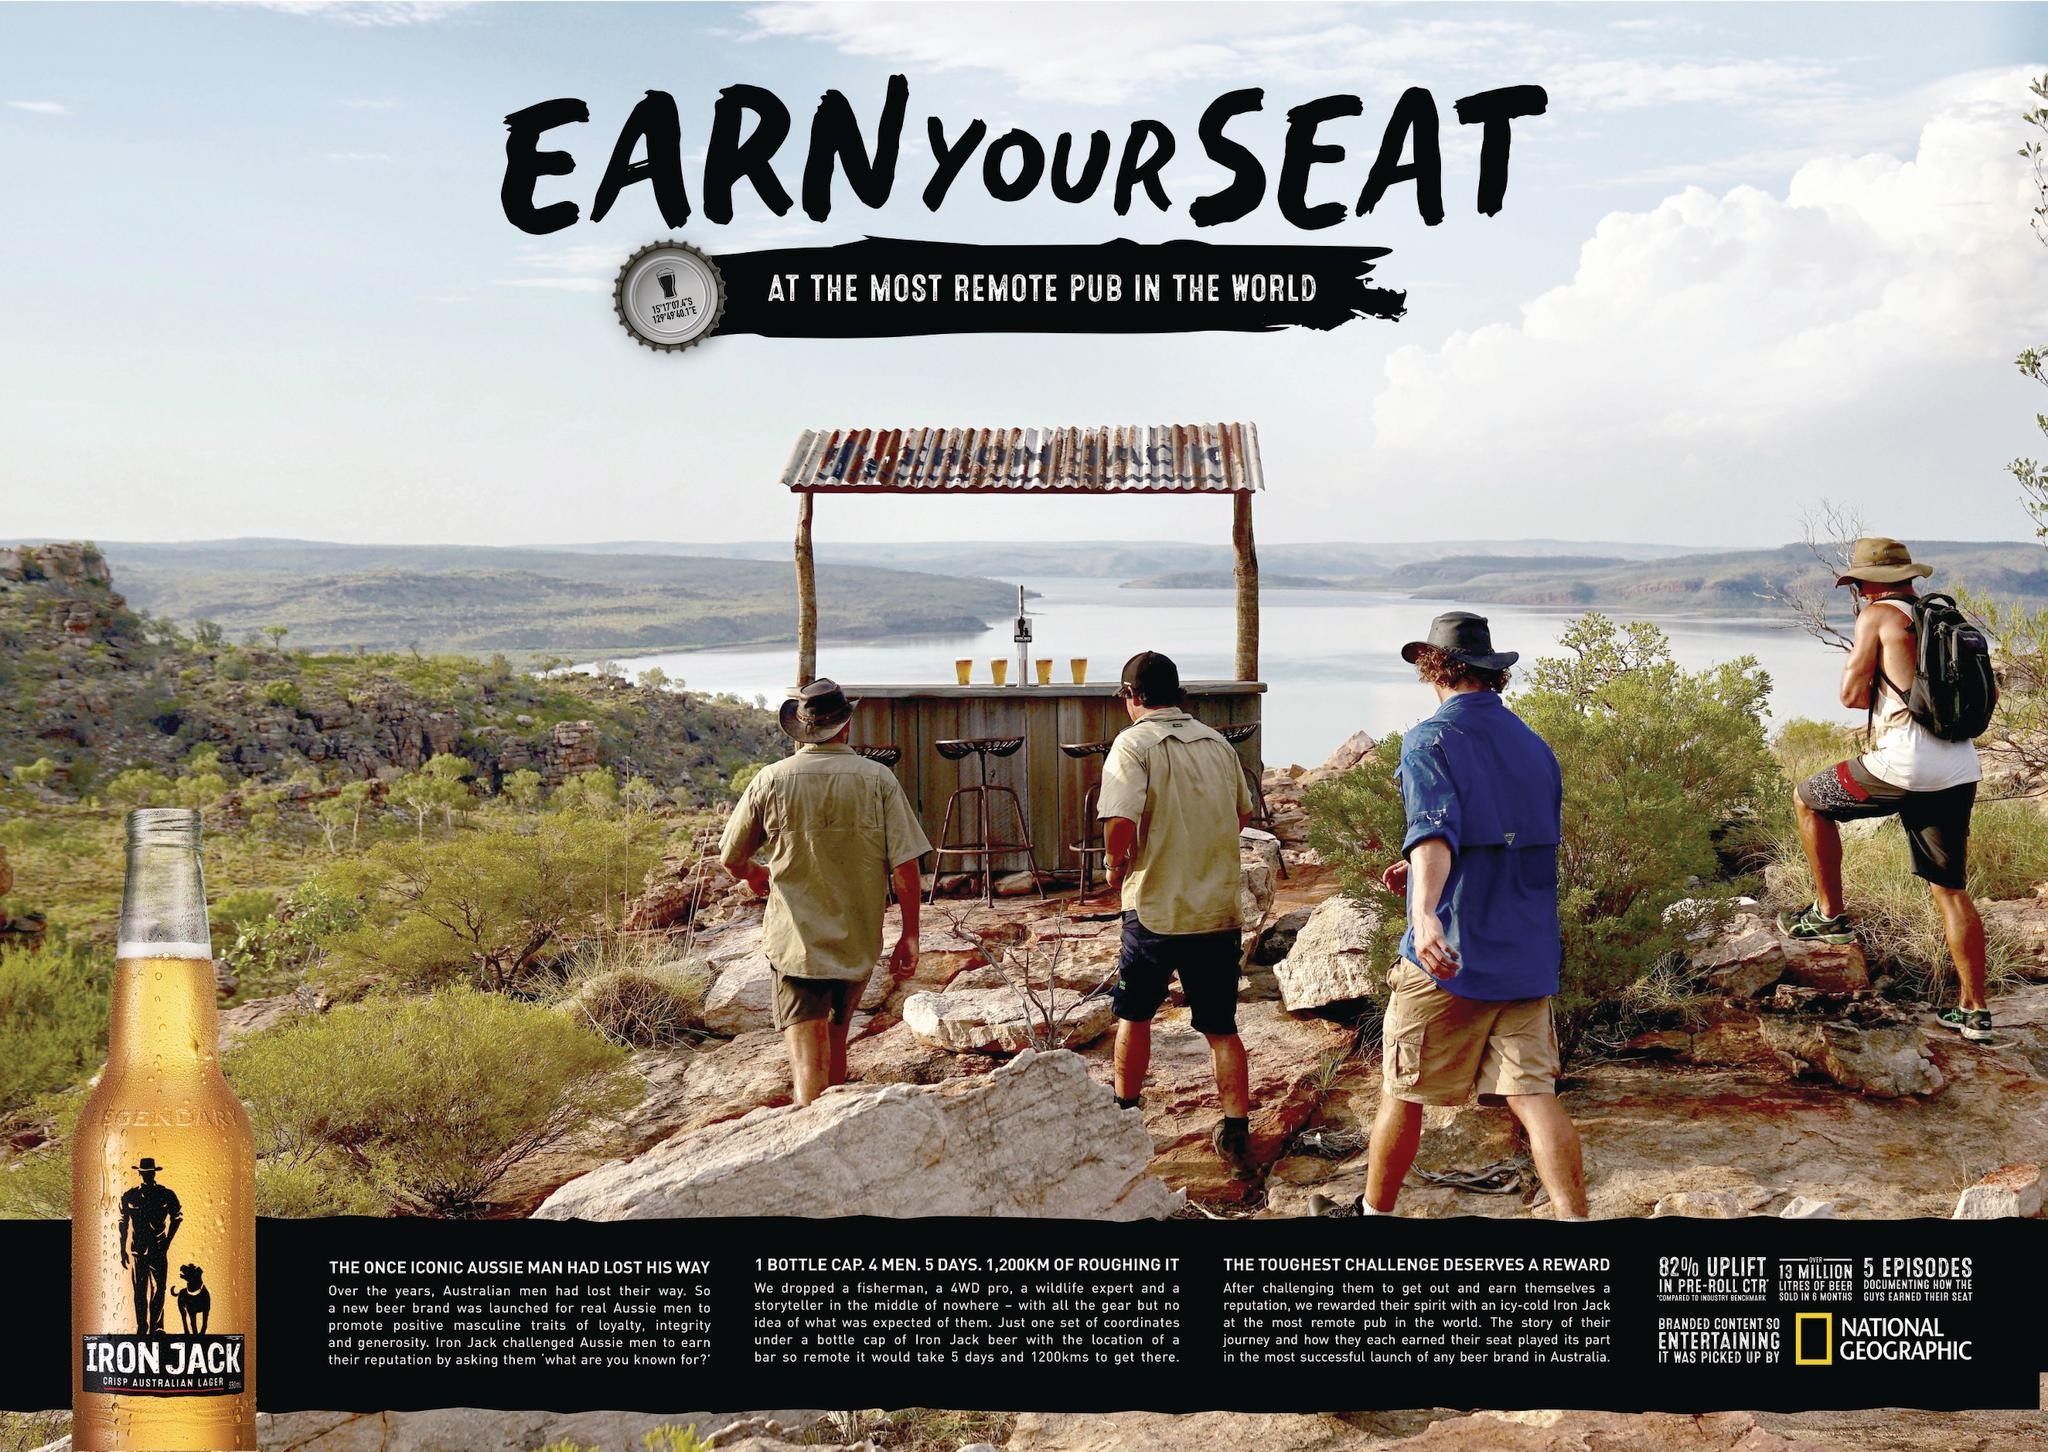 Earn your seat at the most remote pub in the world